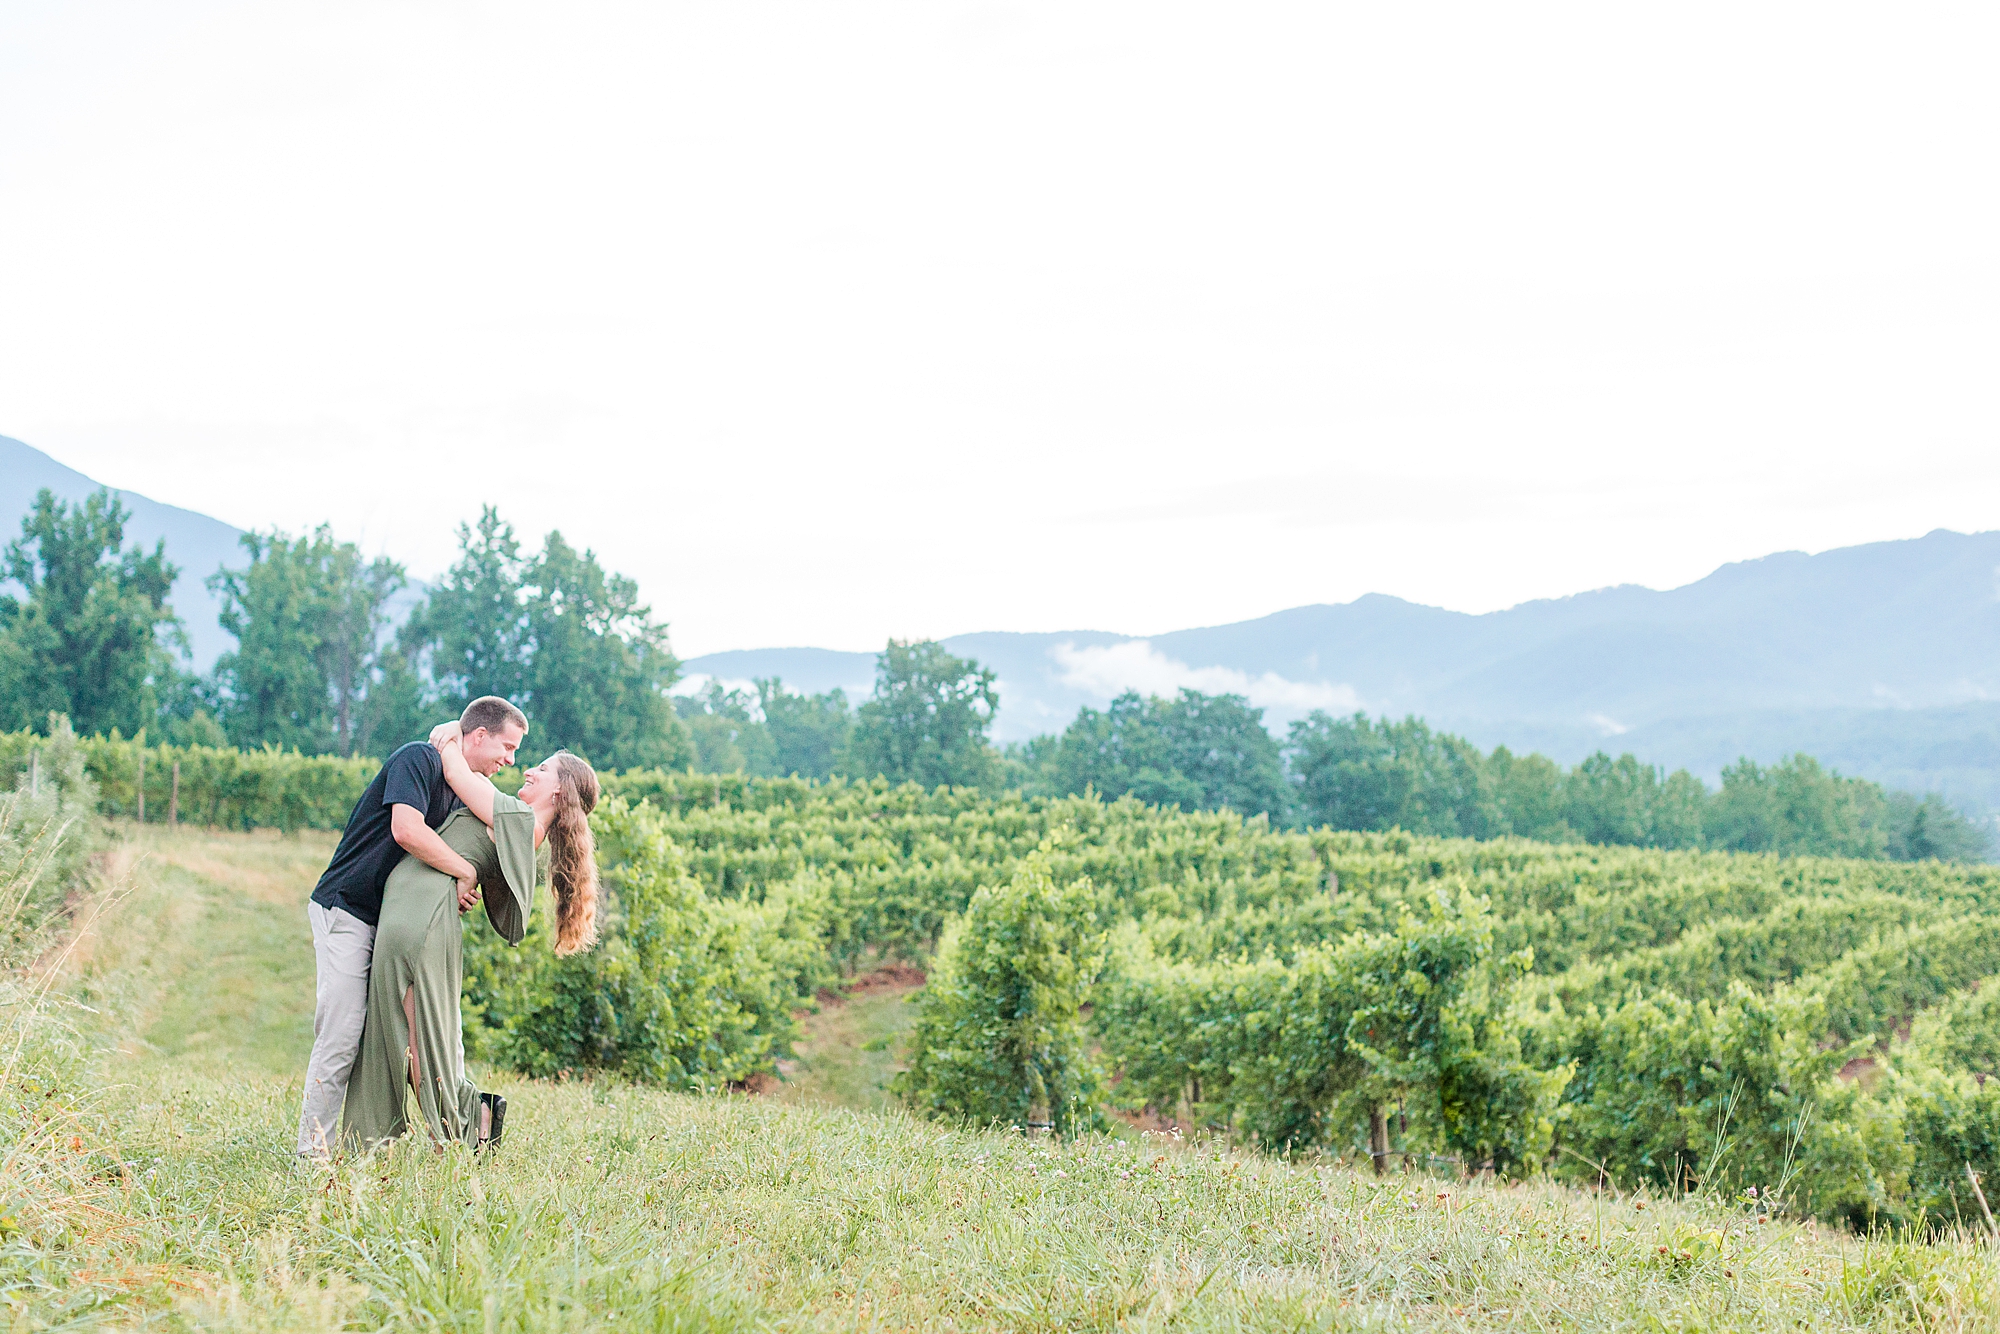 Virginia vineyard wedding venue with couple kissing in background.